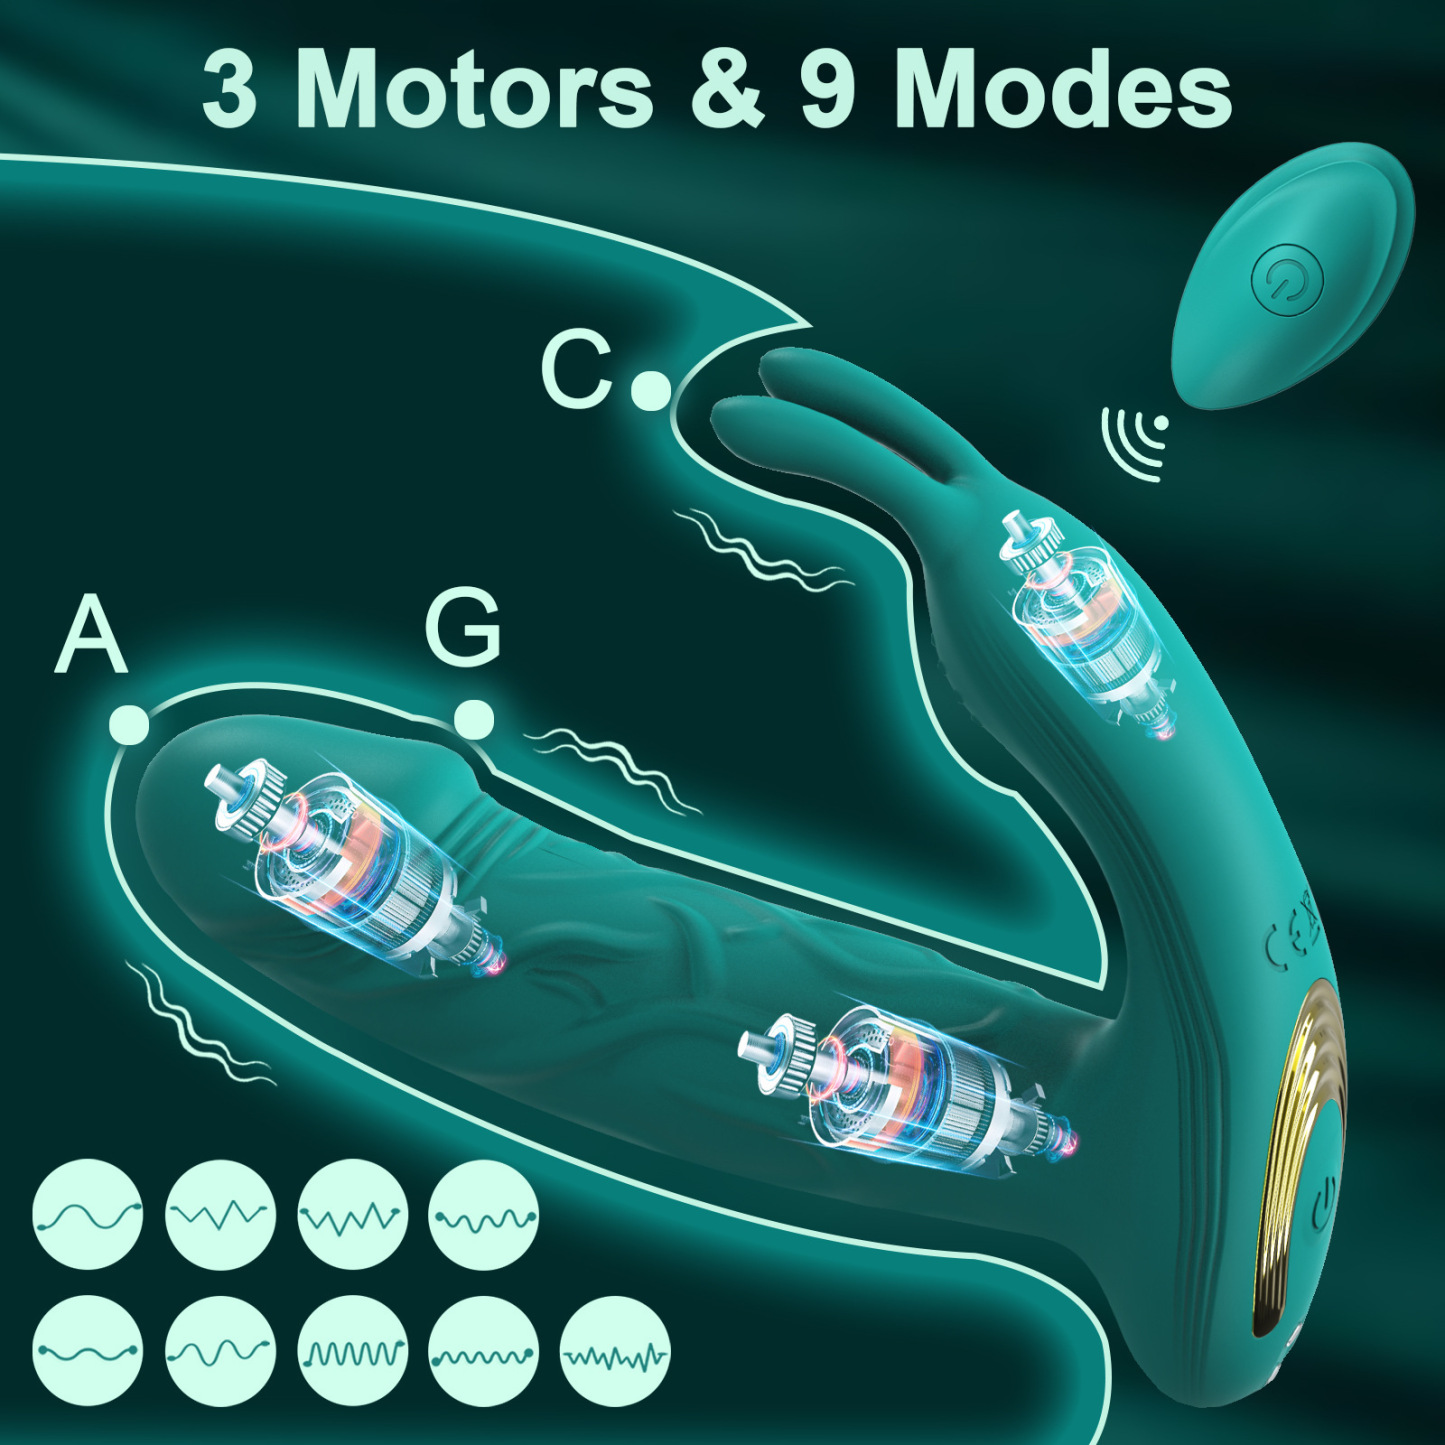 Globally Connectable Triple-Motor Stimulator with 9 Dynamic Modes for Intense Orgasms